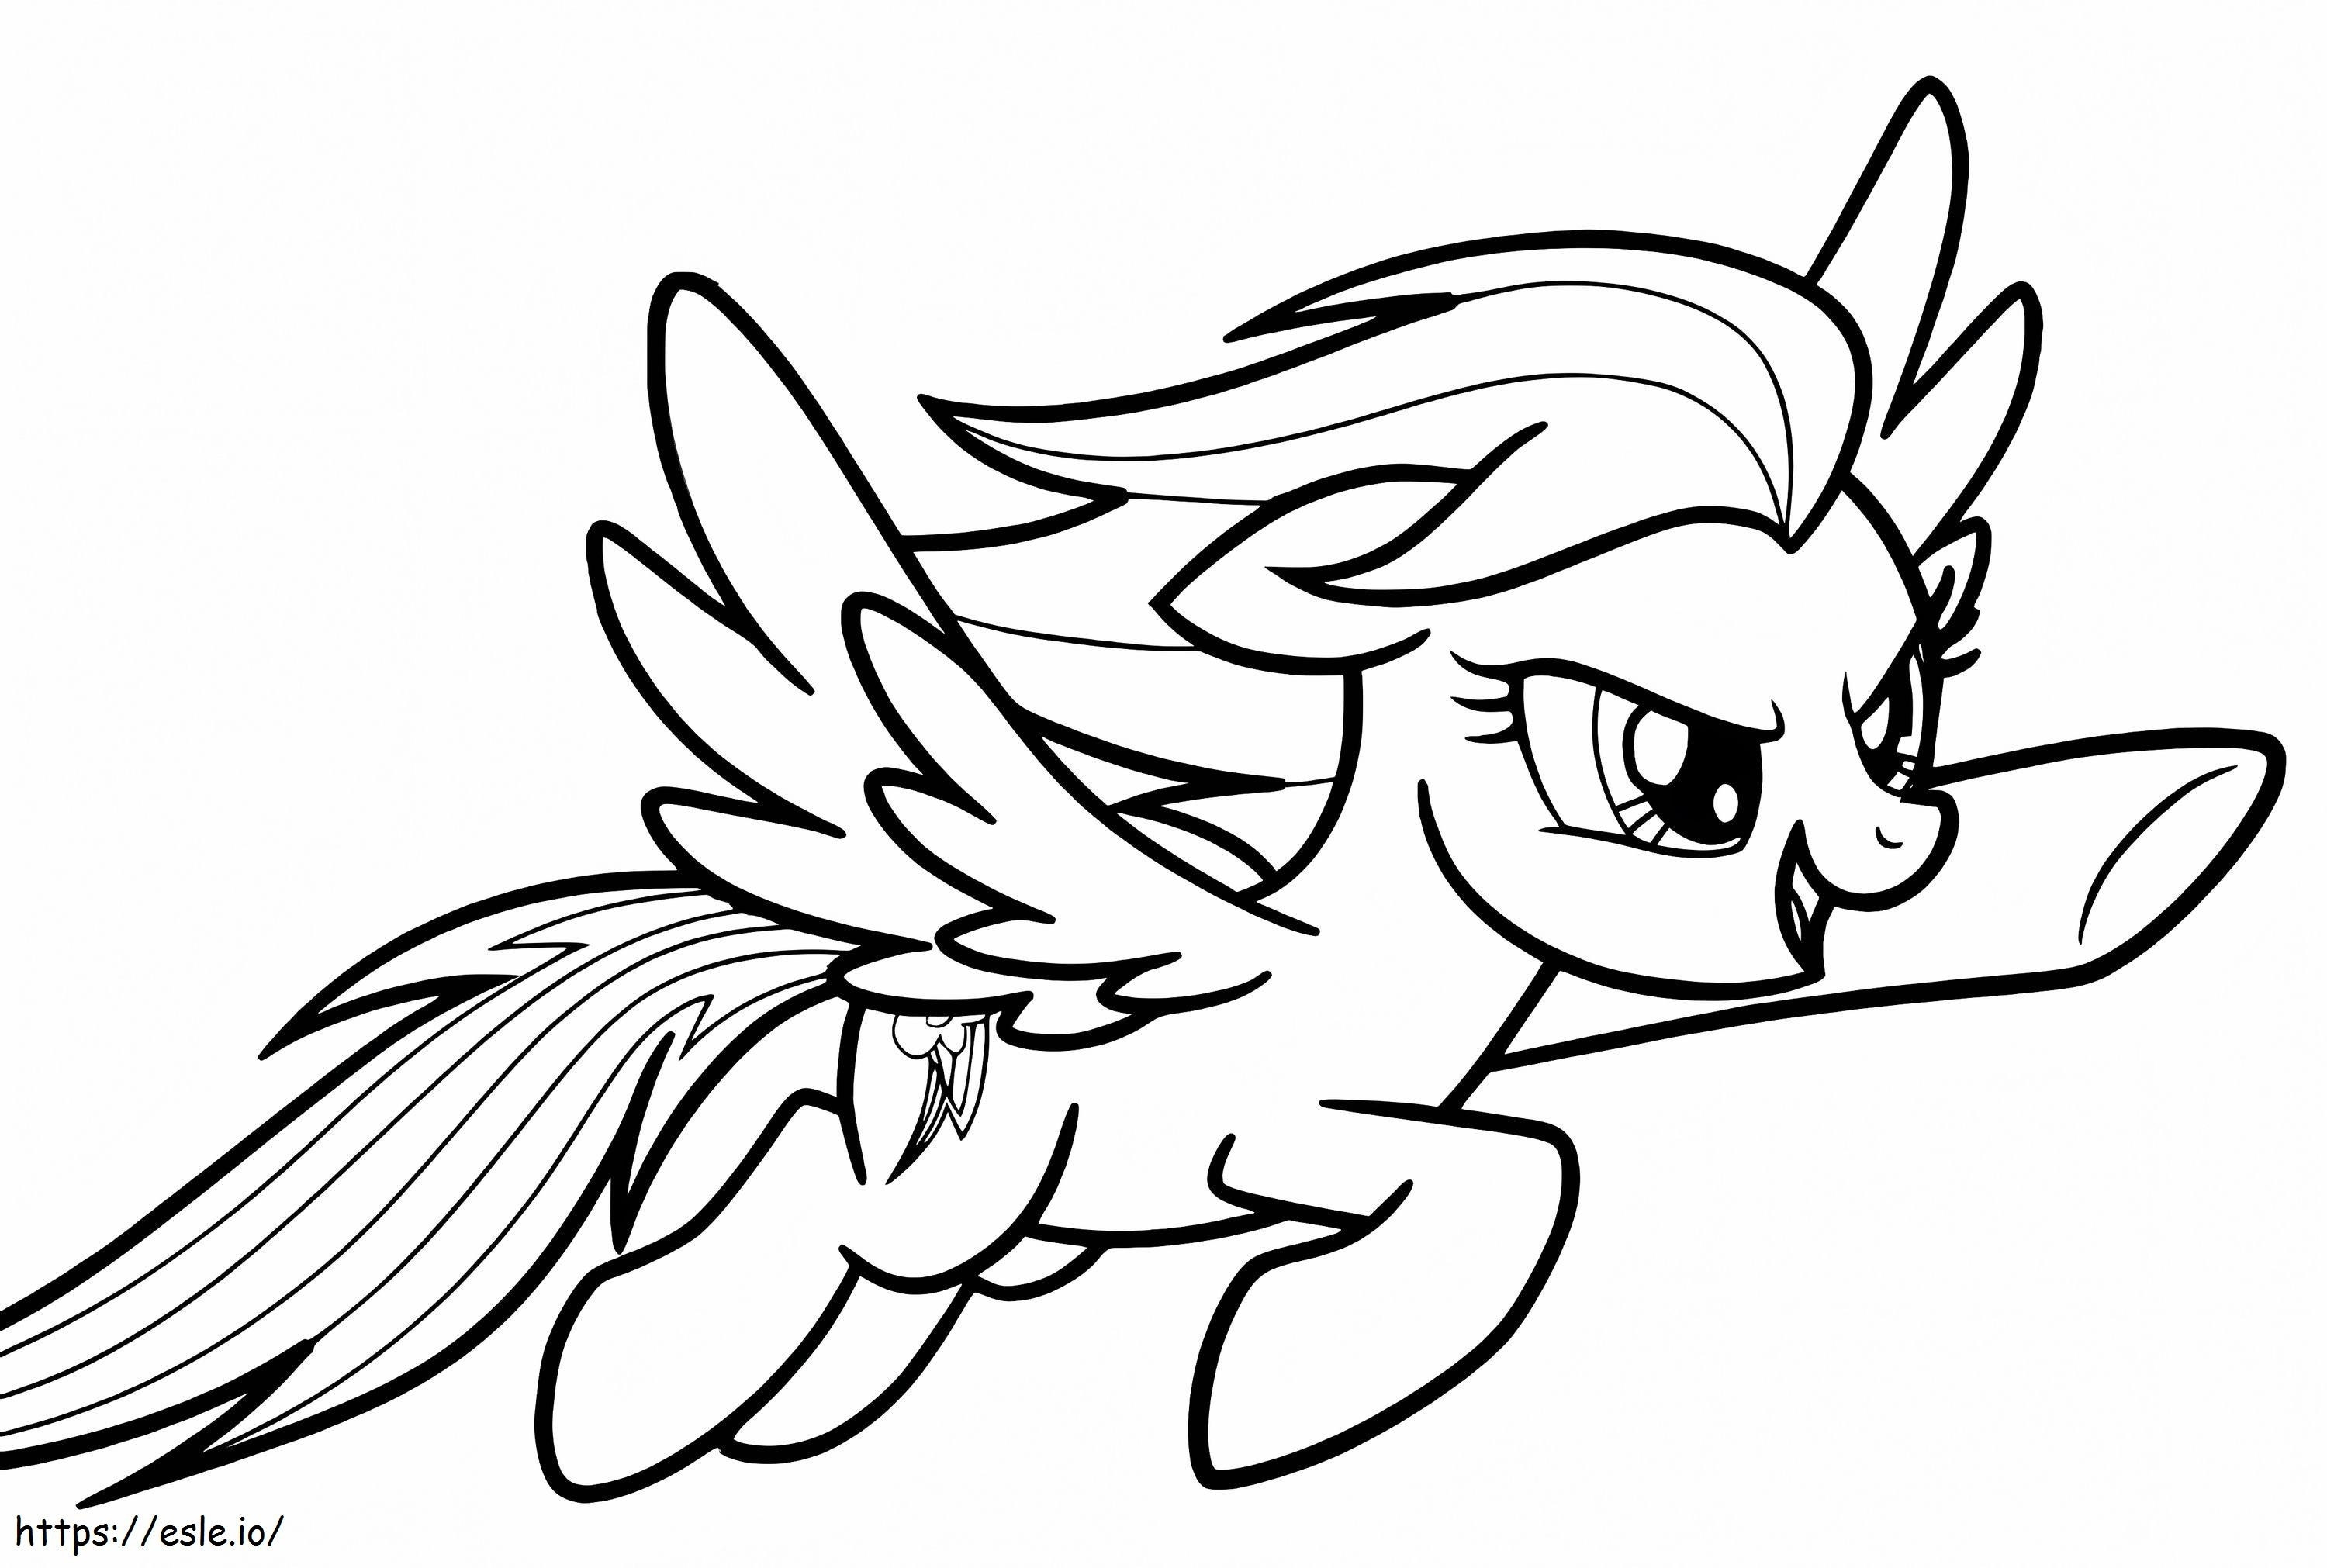 Fast Rainbow Dash coloring page